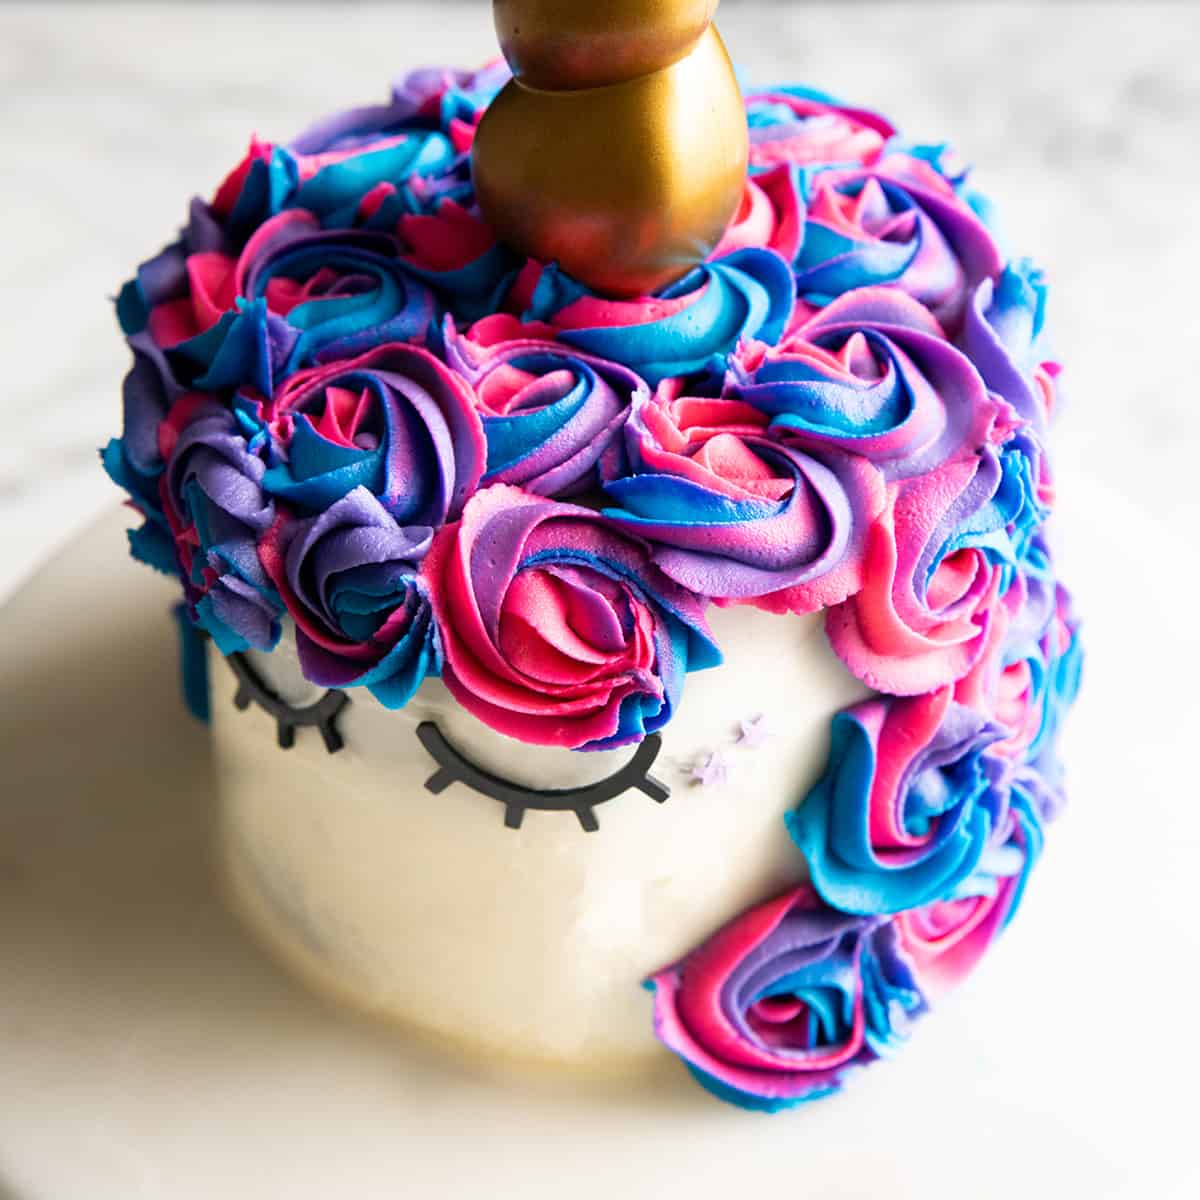 Delicious Frosting For Your Charming Cakes!